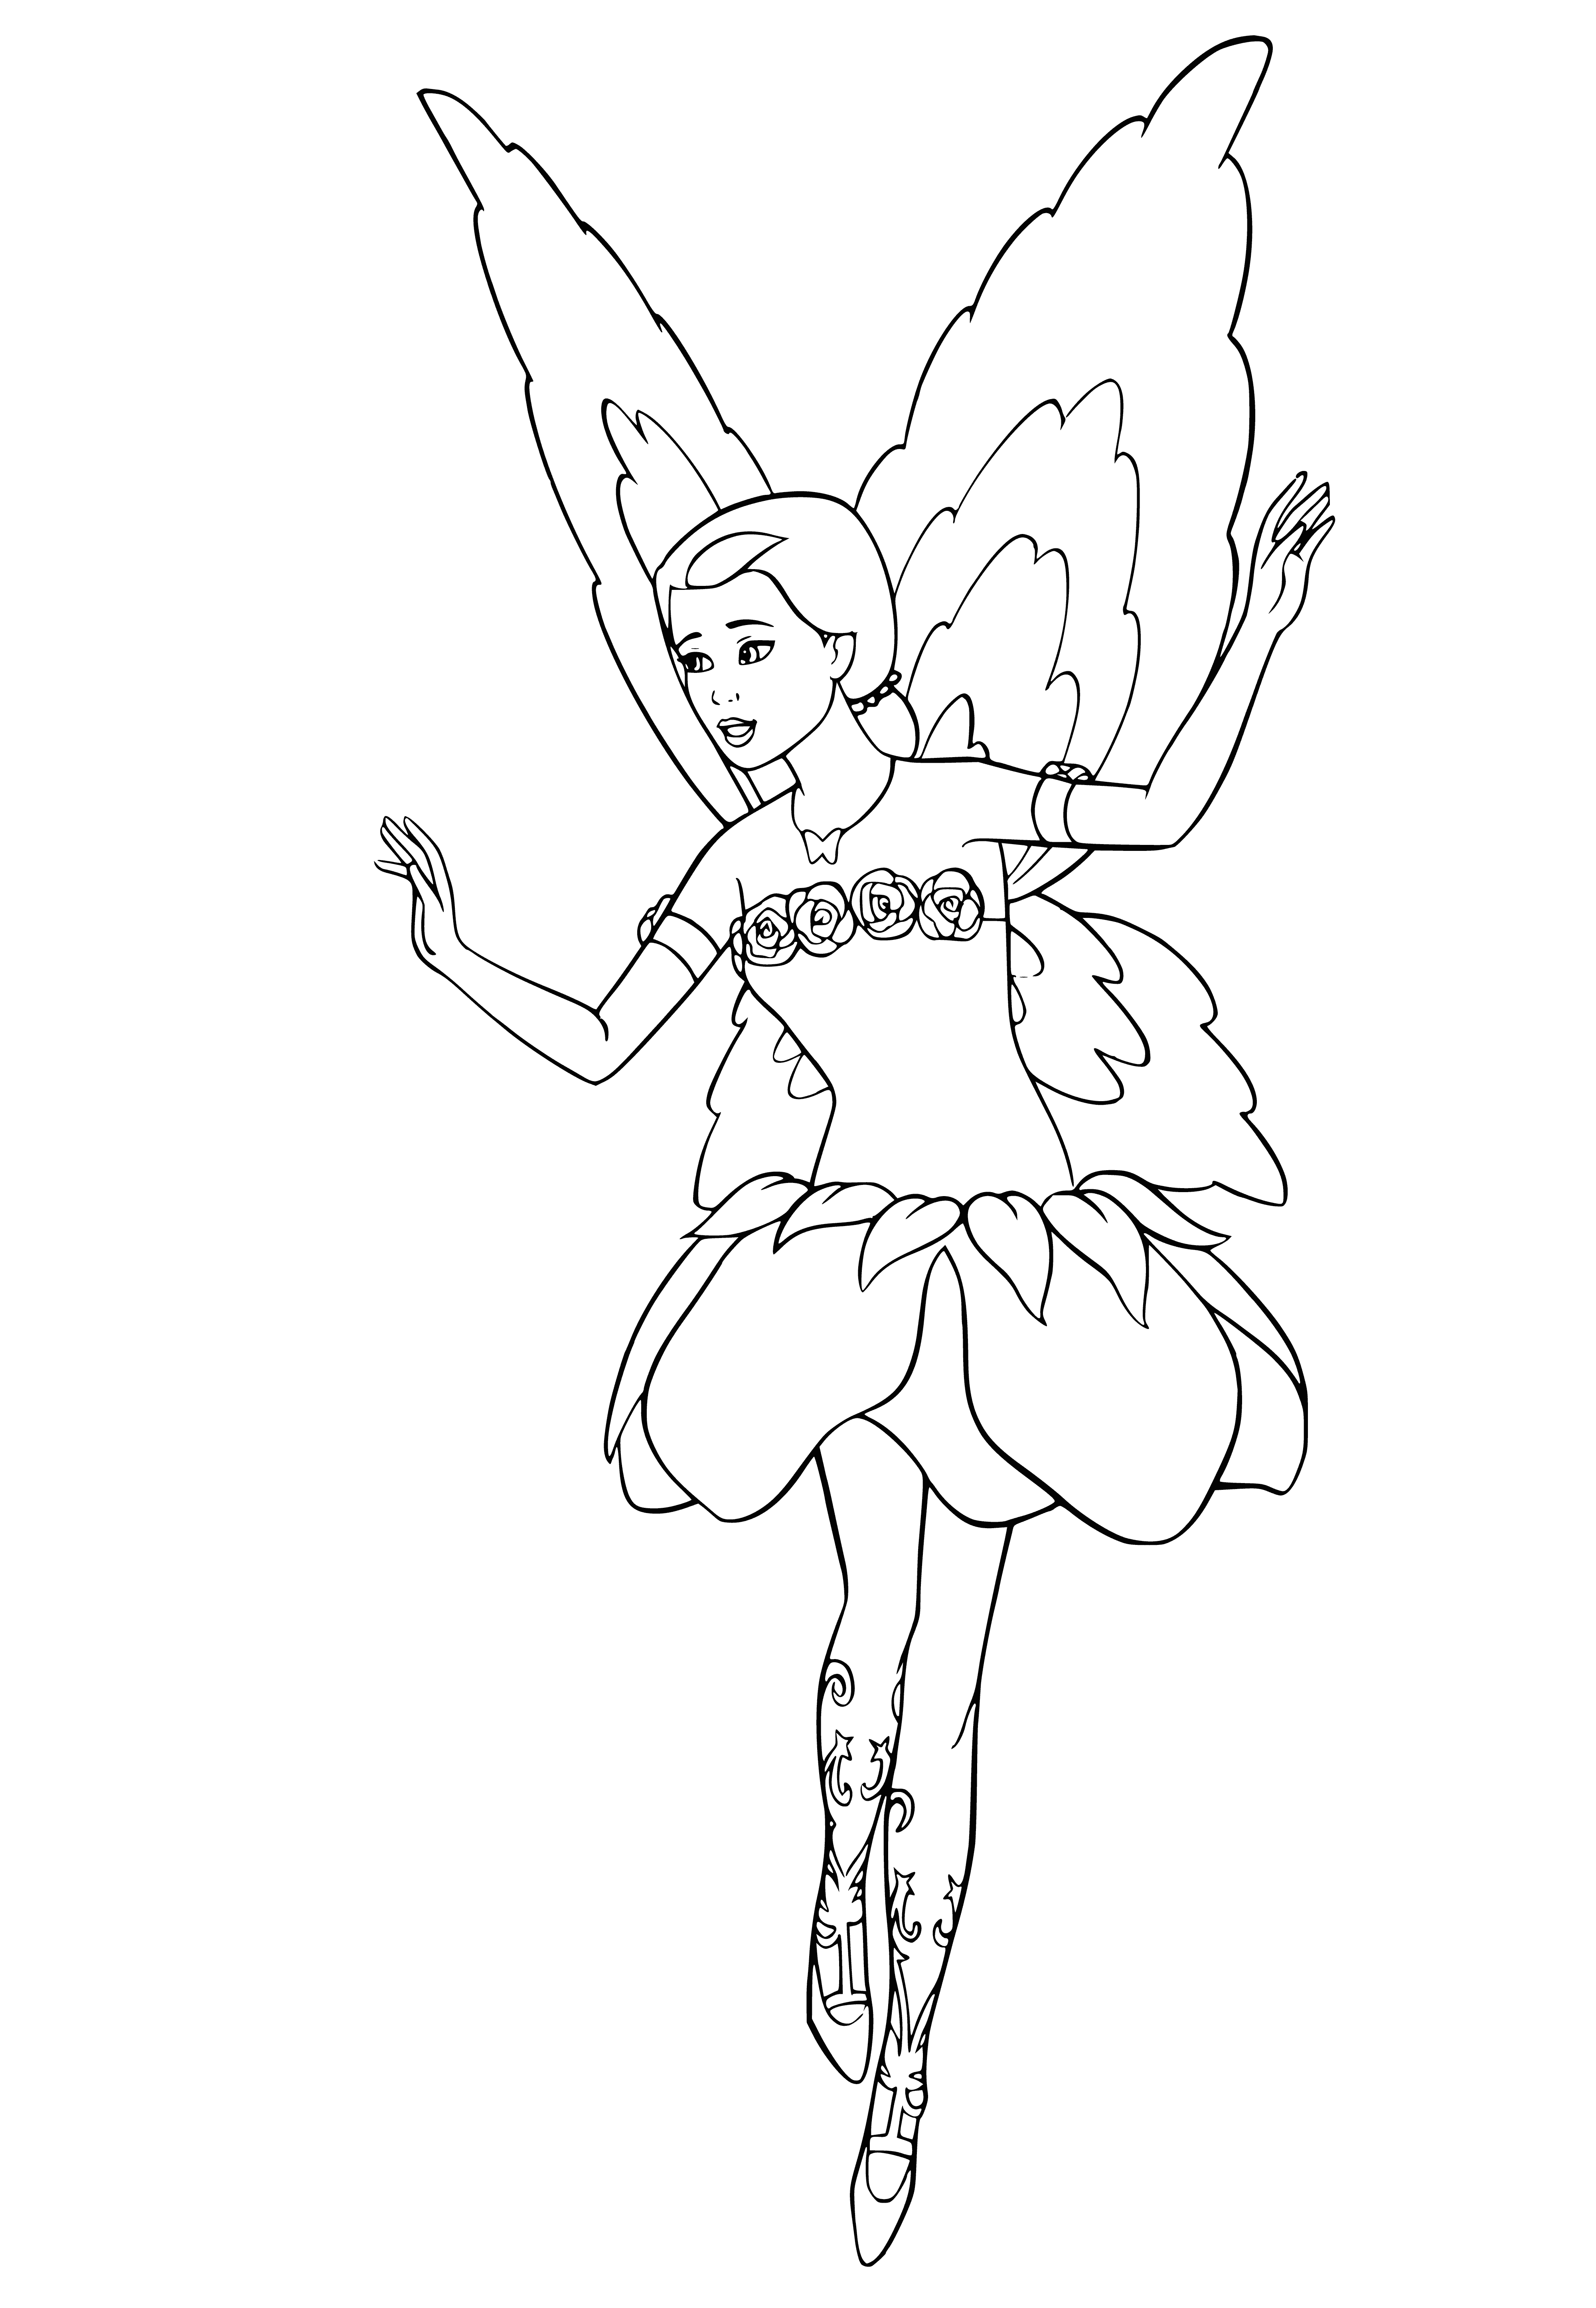 coloring page: Barbie in a pink dress with wings and wand flying through the sky.